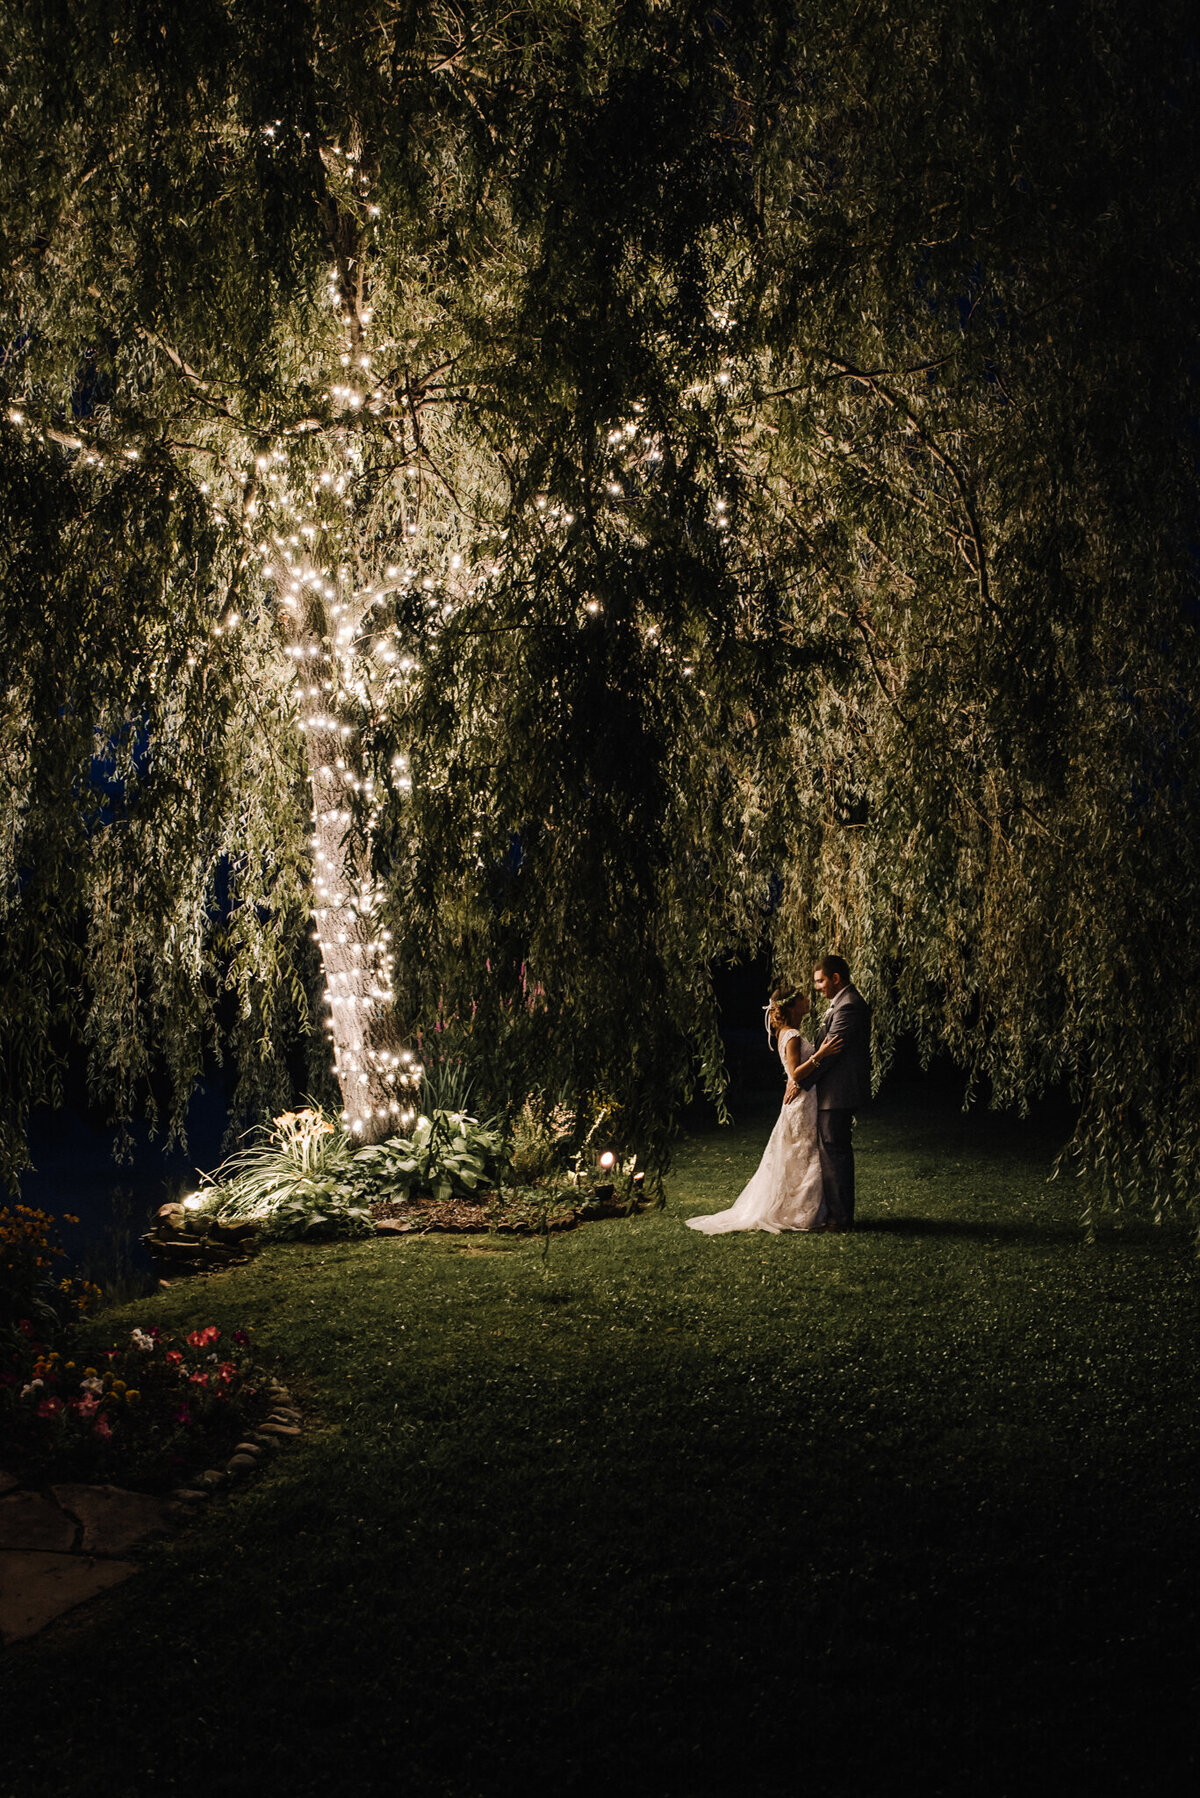 Newlyweds embrace under the lit willow tree at night.